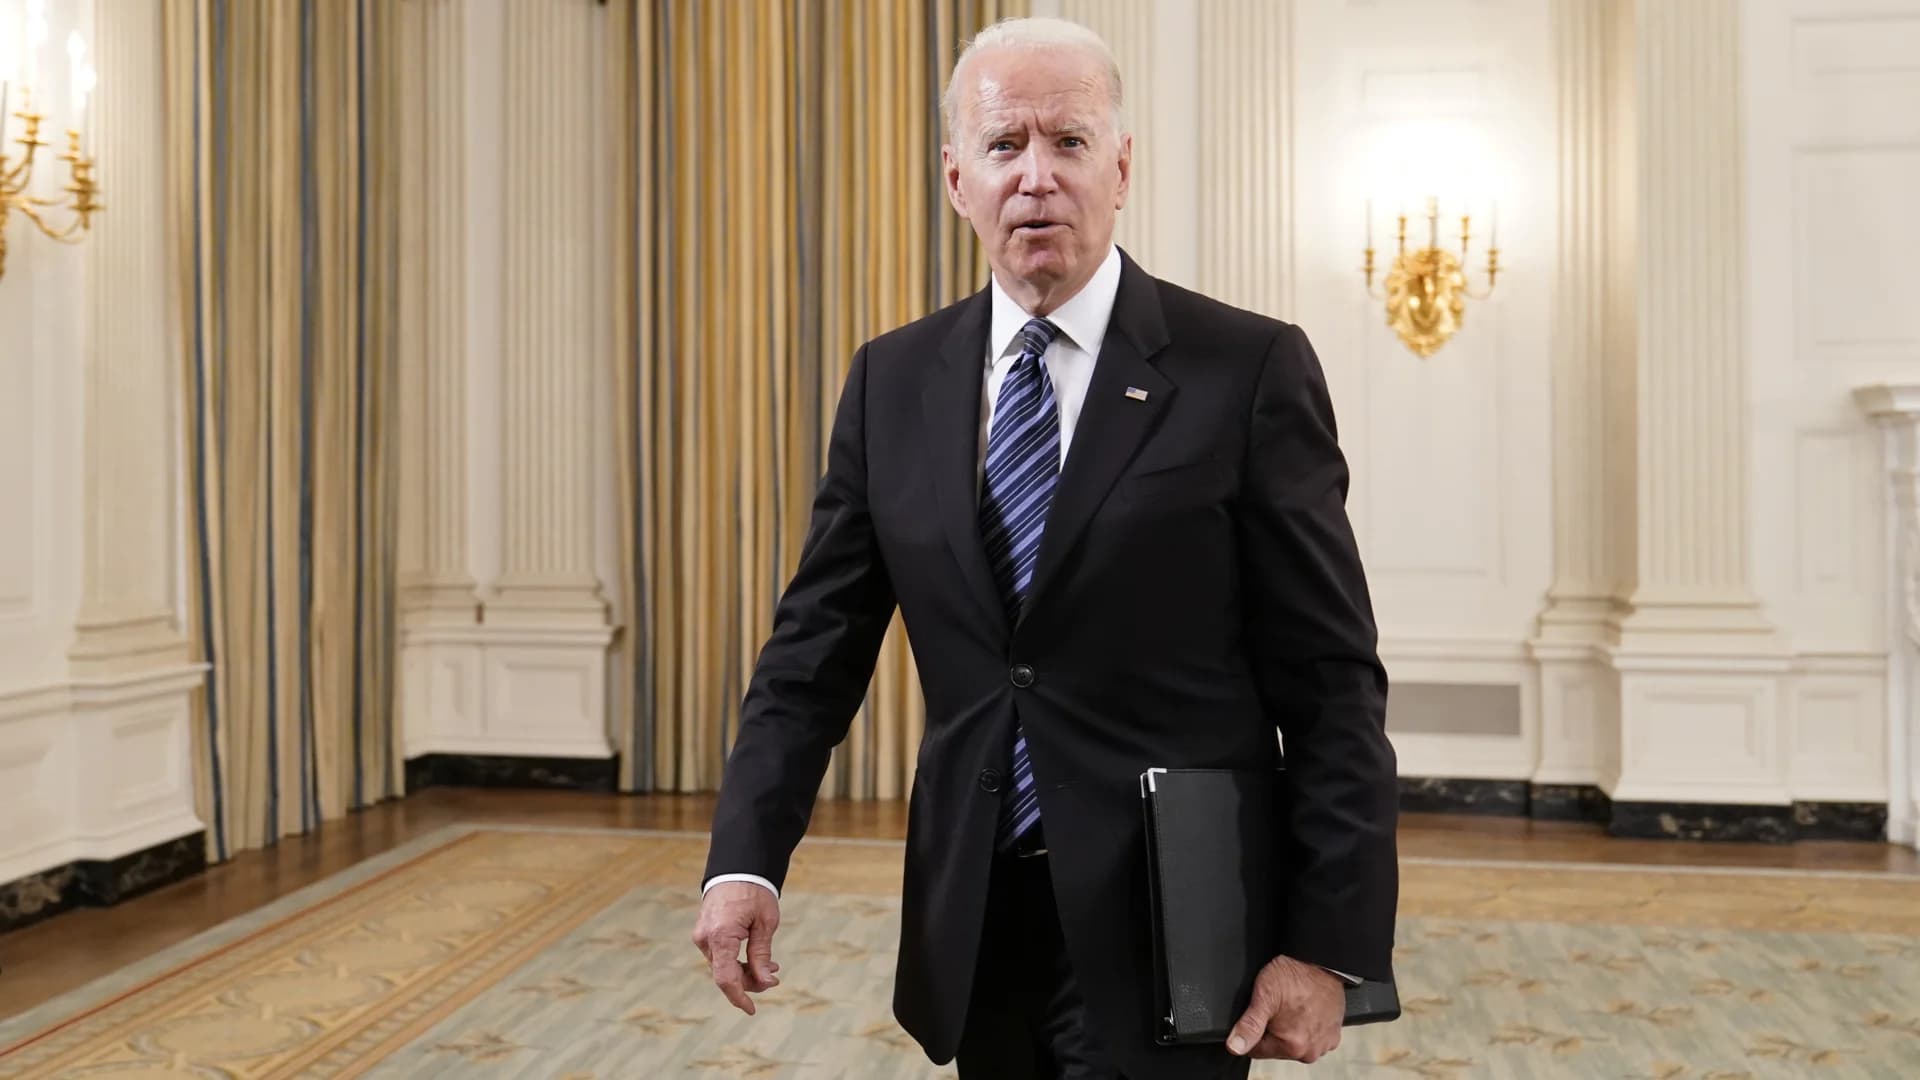 Biden administration extends eviction moratorium for 30 days to help those struggling amid pandemic